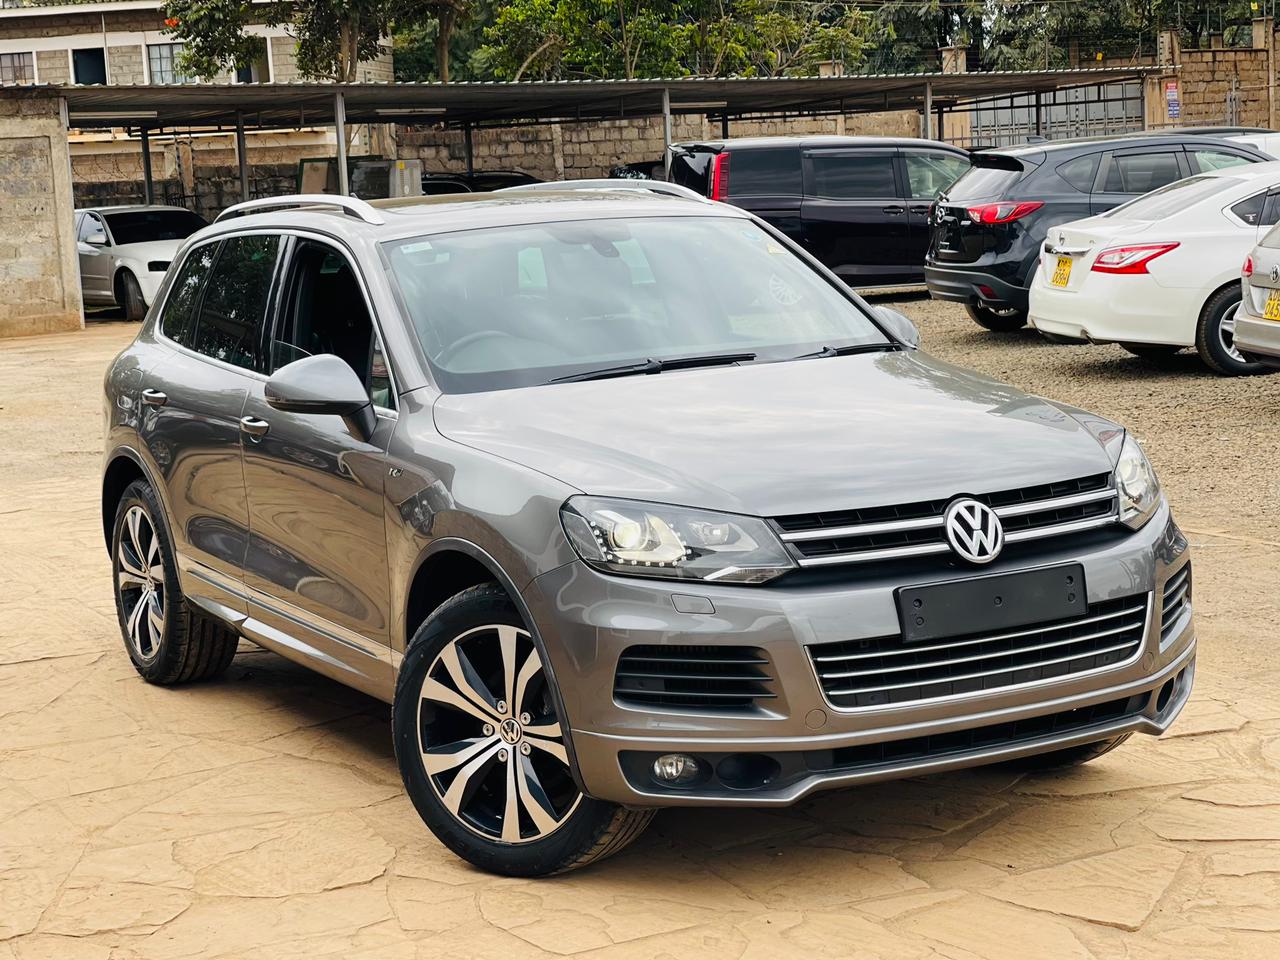 Volkswagen Touareg R-LINE 2014 Fully LOADED New Hire Purchase OK Wow